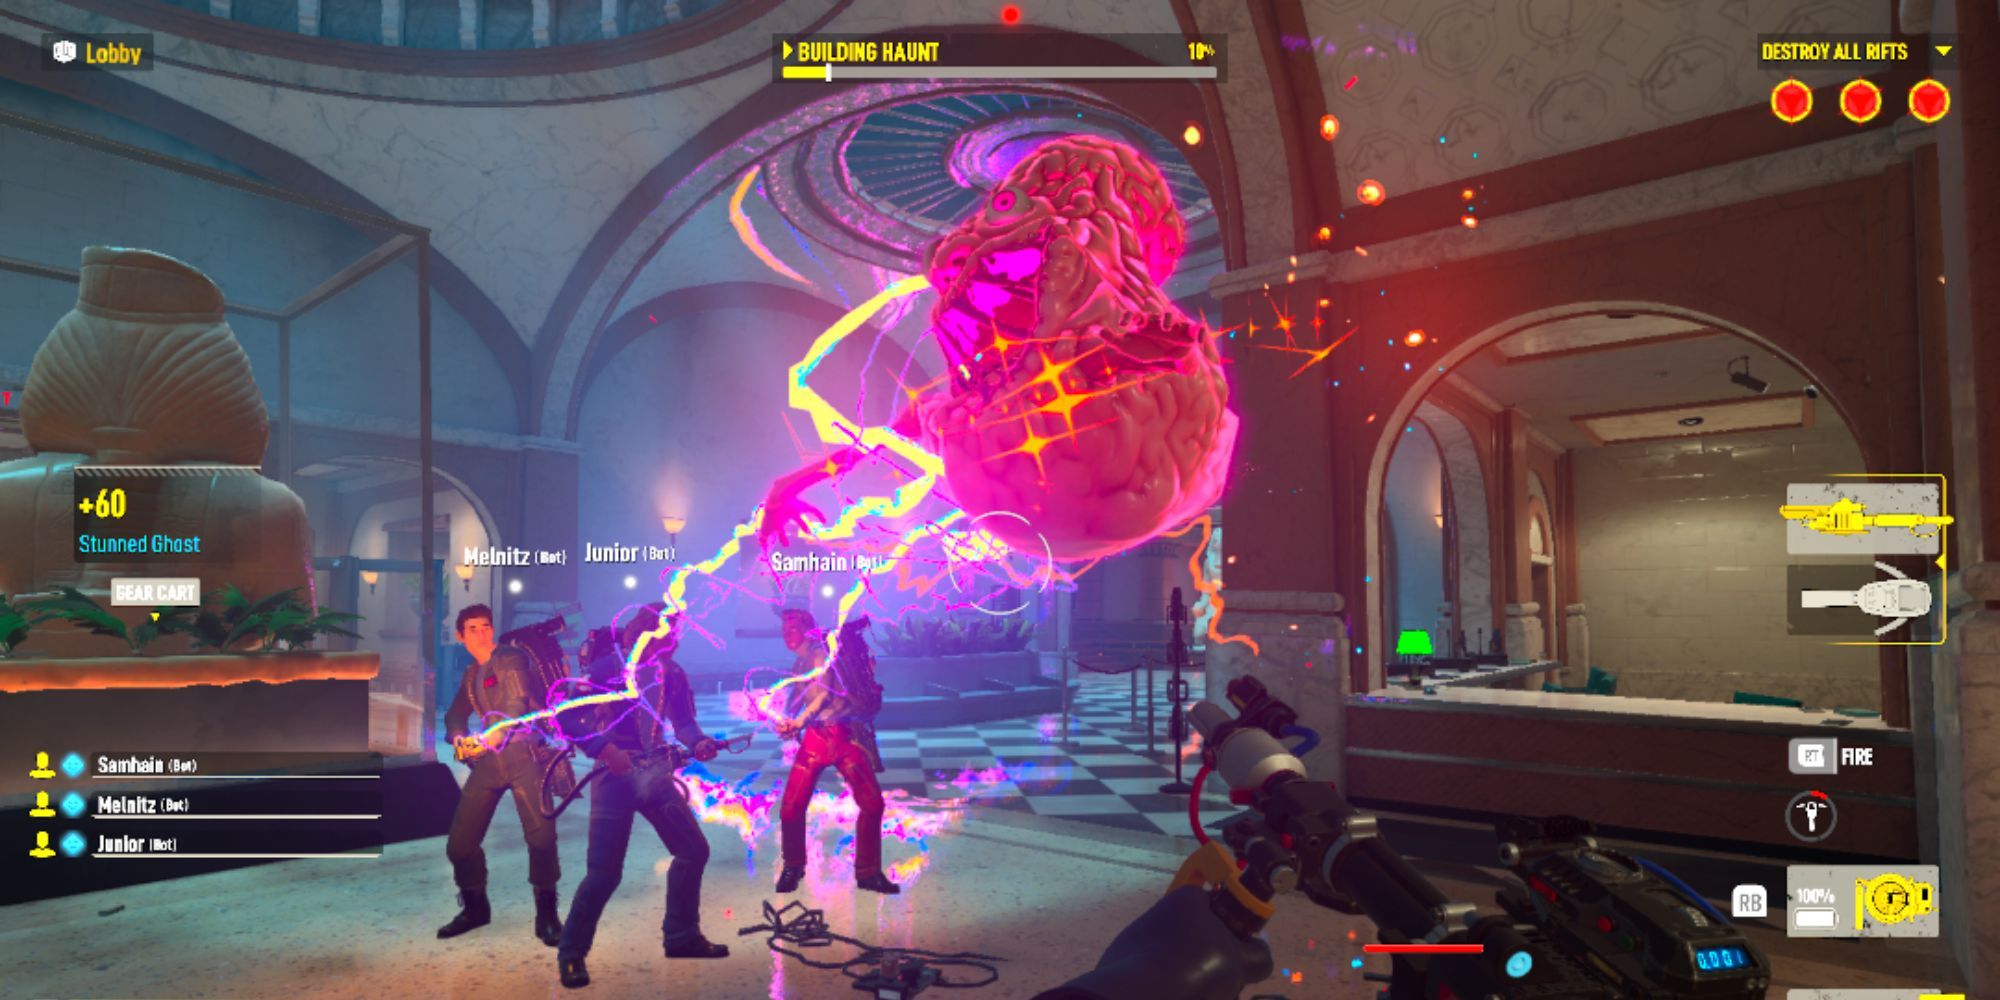 Busters Tethering A Ghost Together In Ghostbusters: Spirits Unleashed